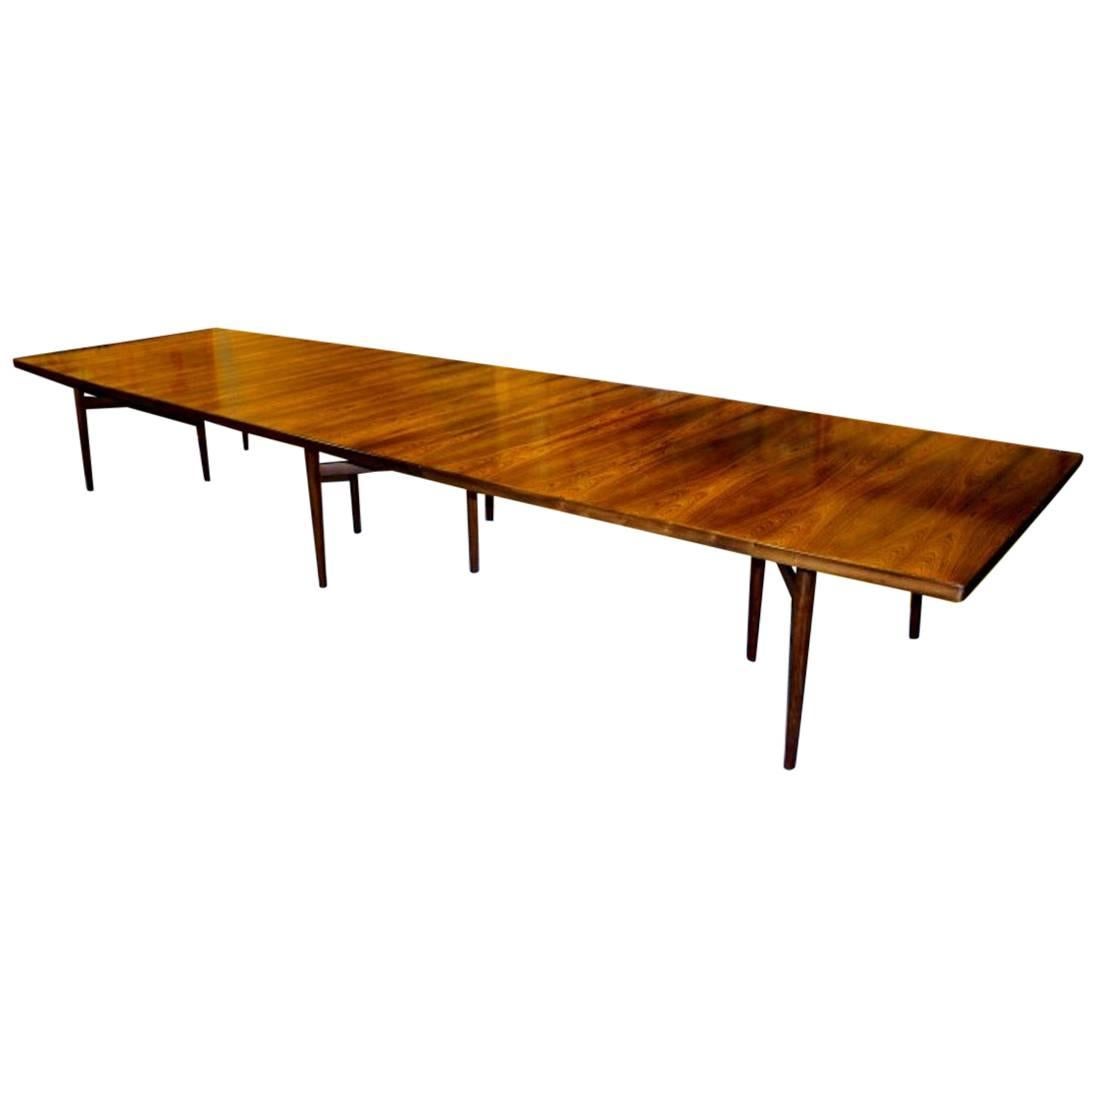 Very Rare and Big Conference Table in Rosewood by Arne Vodder for Sibast Møbler